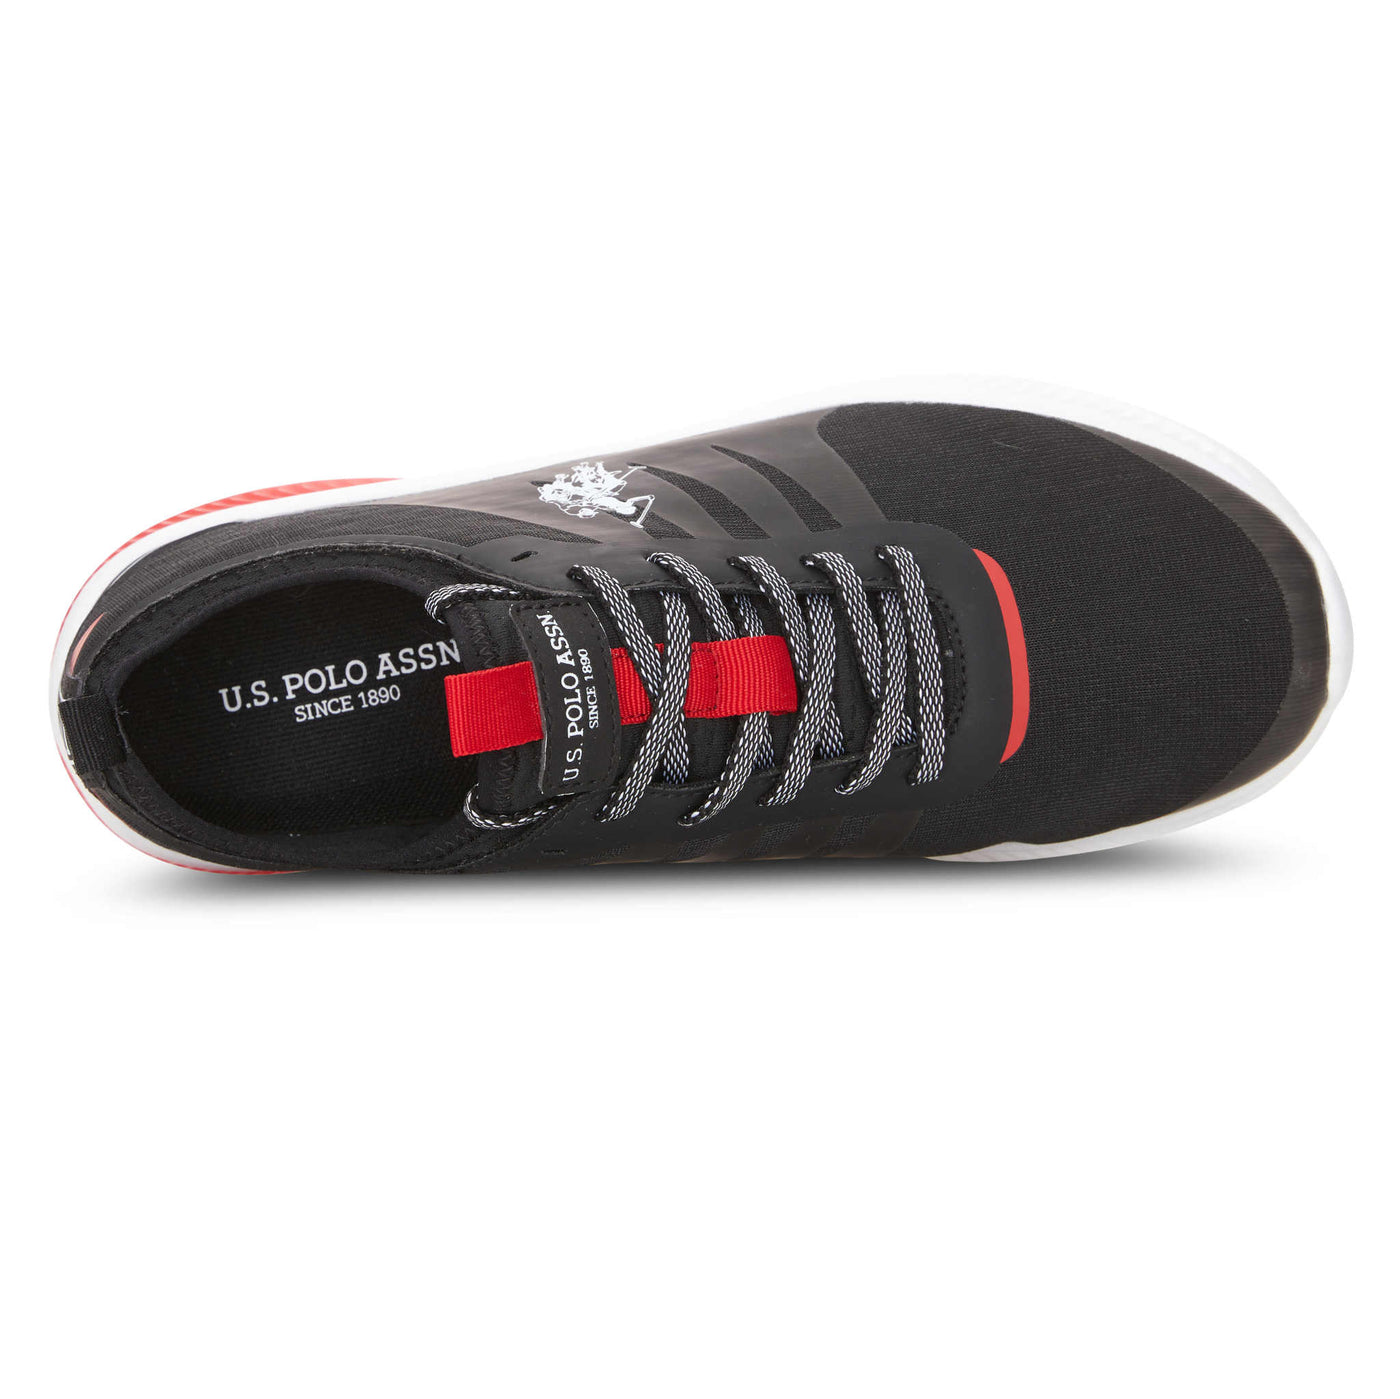 U.S. Polo Assn. Men's Speed Sneakers Red